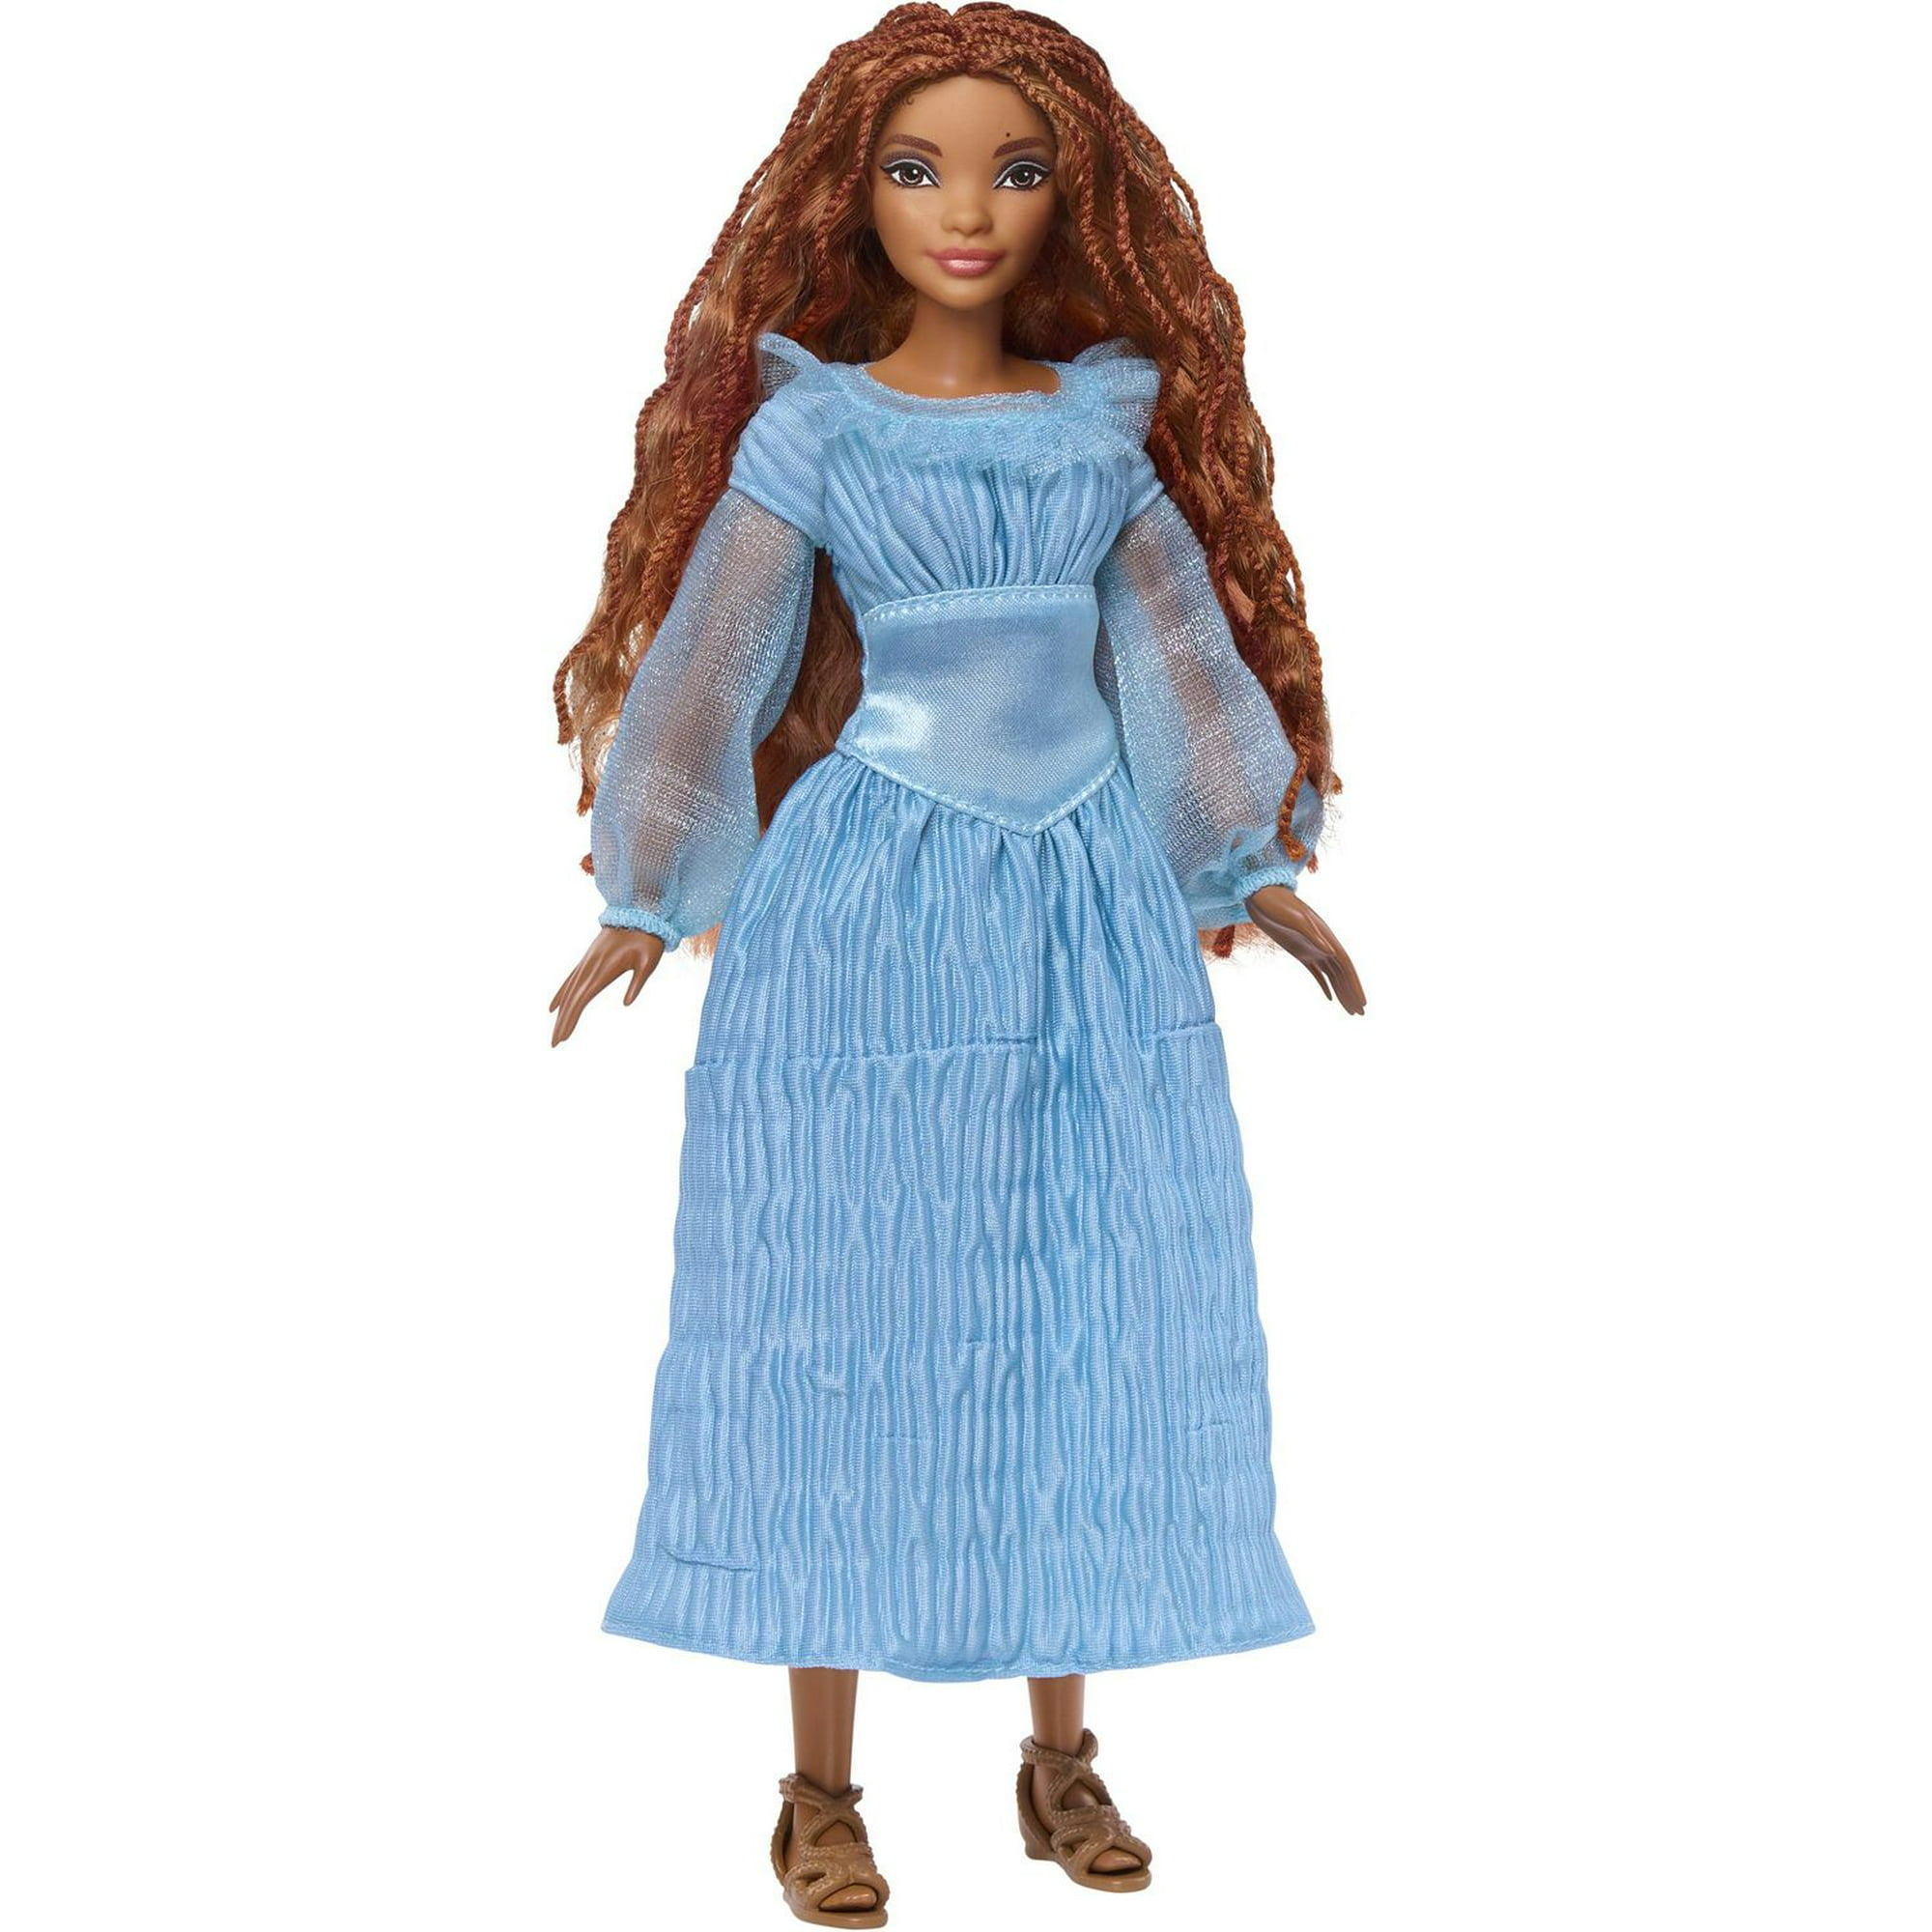 Disney The Little Mermaid Ariel Fashion Doll on Land in Signature Blue  Dress, Toys Inspired by Disney’s The Little Mermaid​​